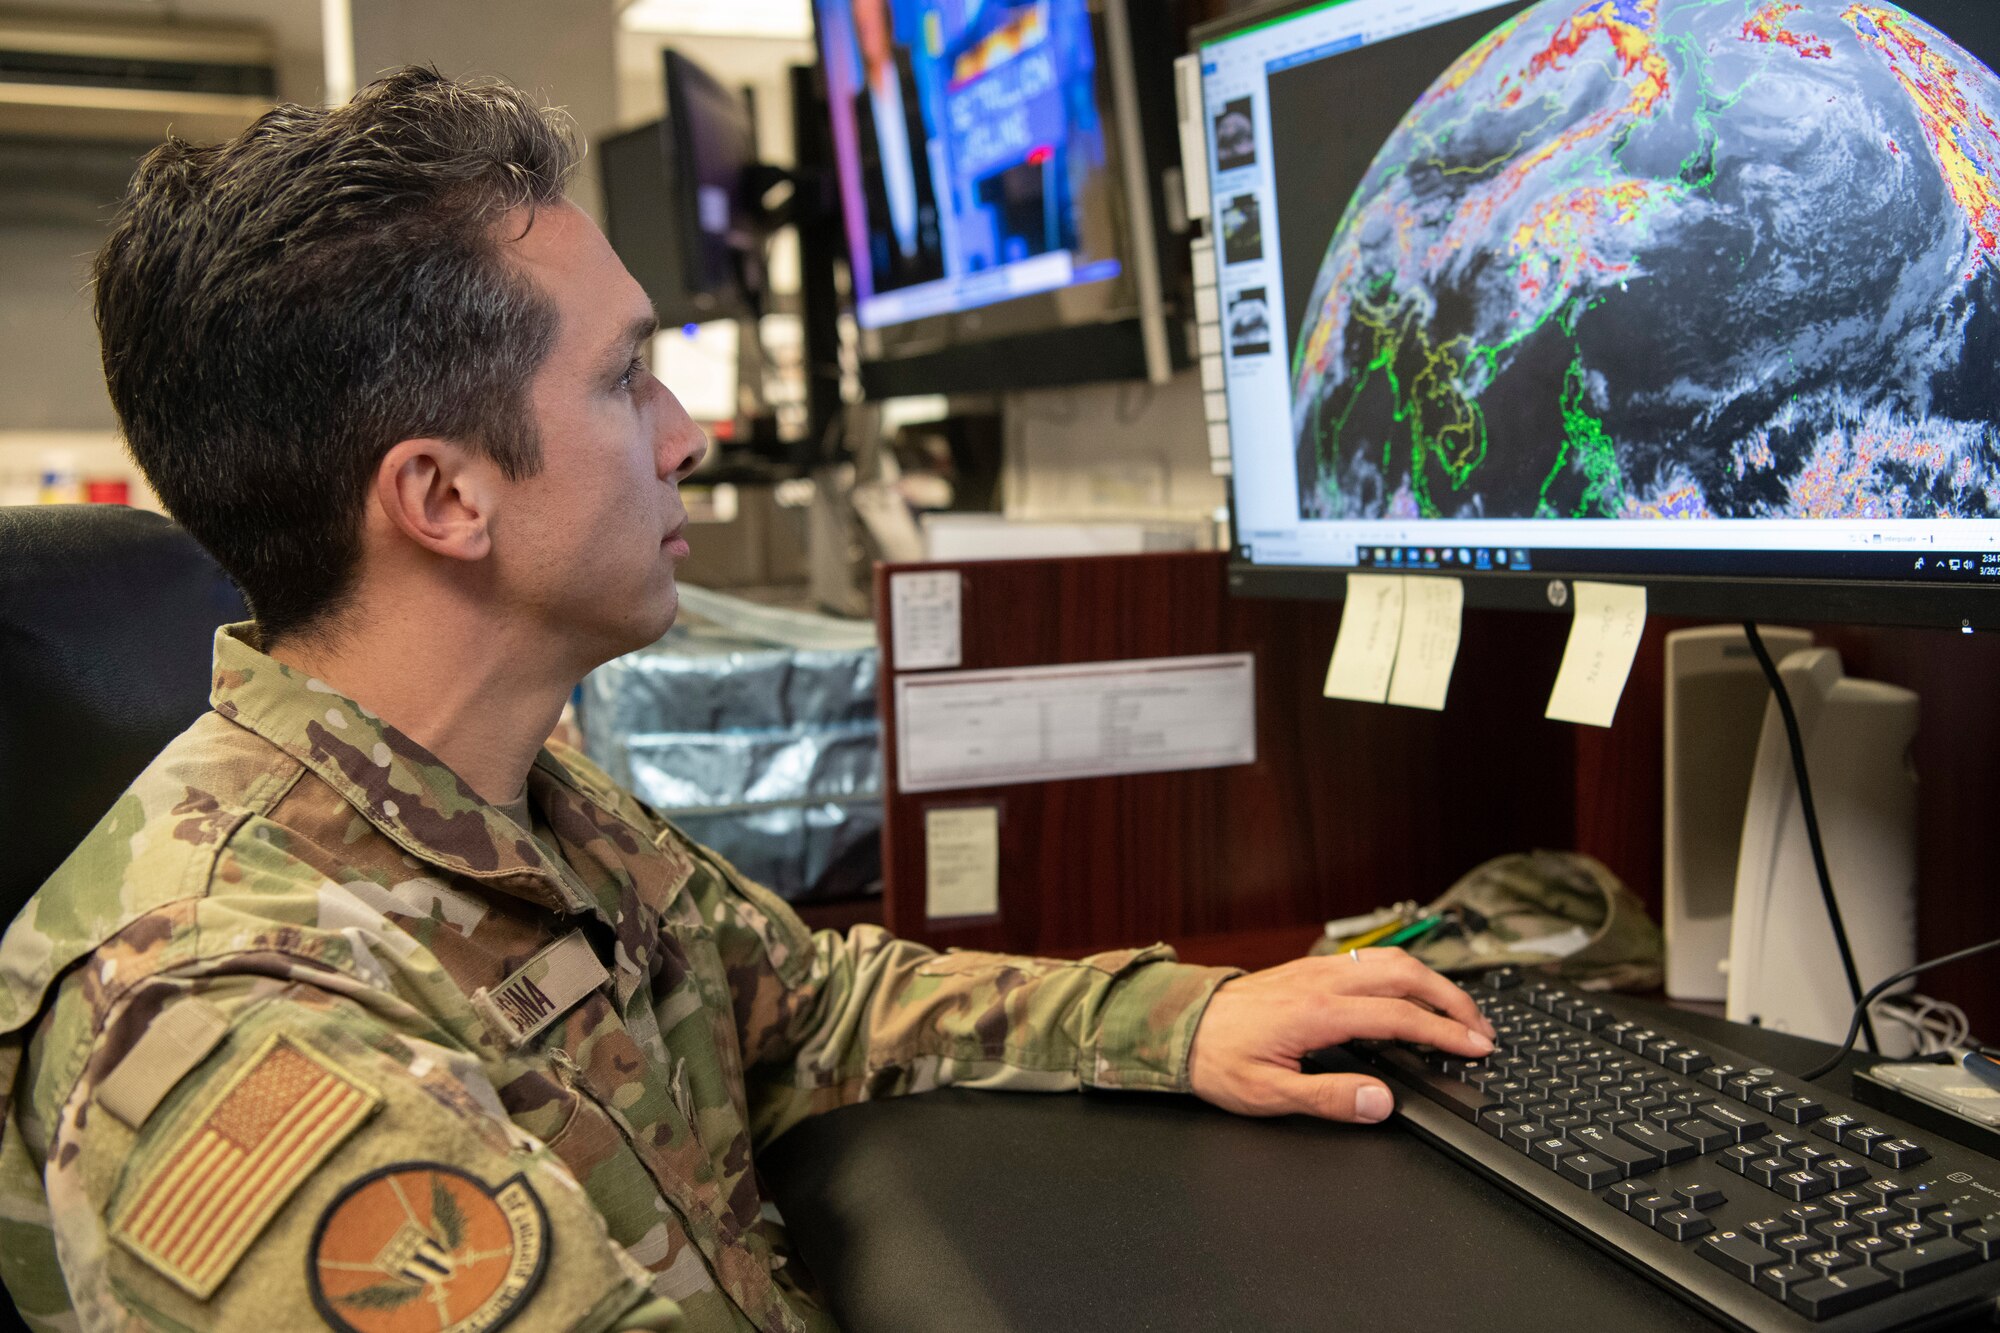 Senior Airman Thomas Messina, 18th Operations Support Squadron weather journeyman, monitors weather conditions Mar. 26, 2020, at Kadena Air Base, Japan. Weather Airmen must maintain accurate weather readings even during adverse conditions. (U.S. Air Force photo by Senior Airman Rhett Isbell)